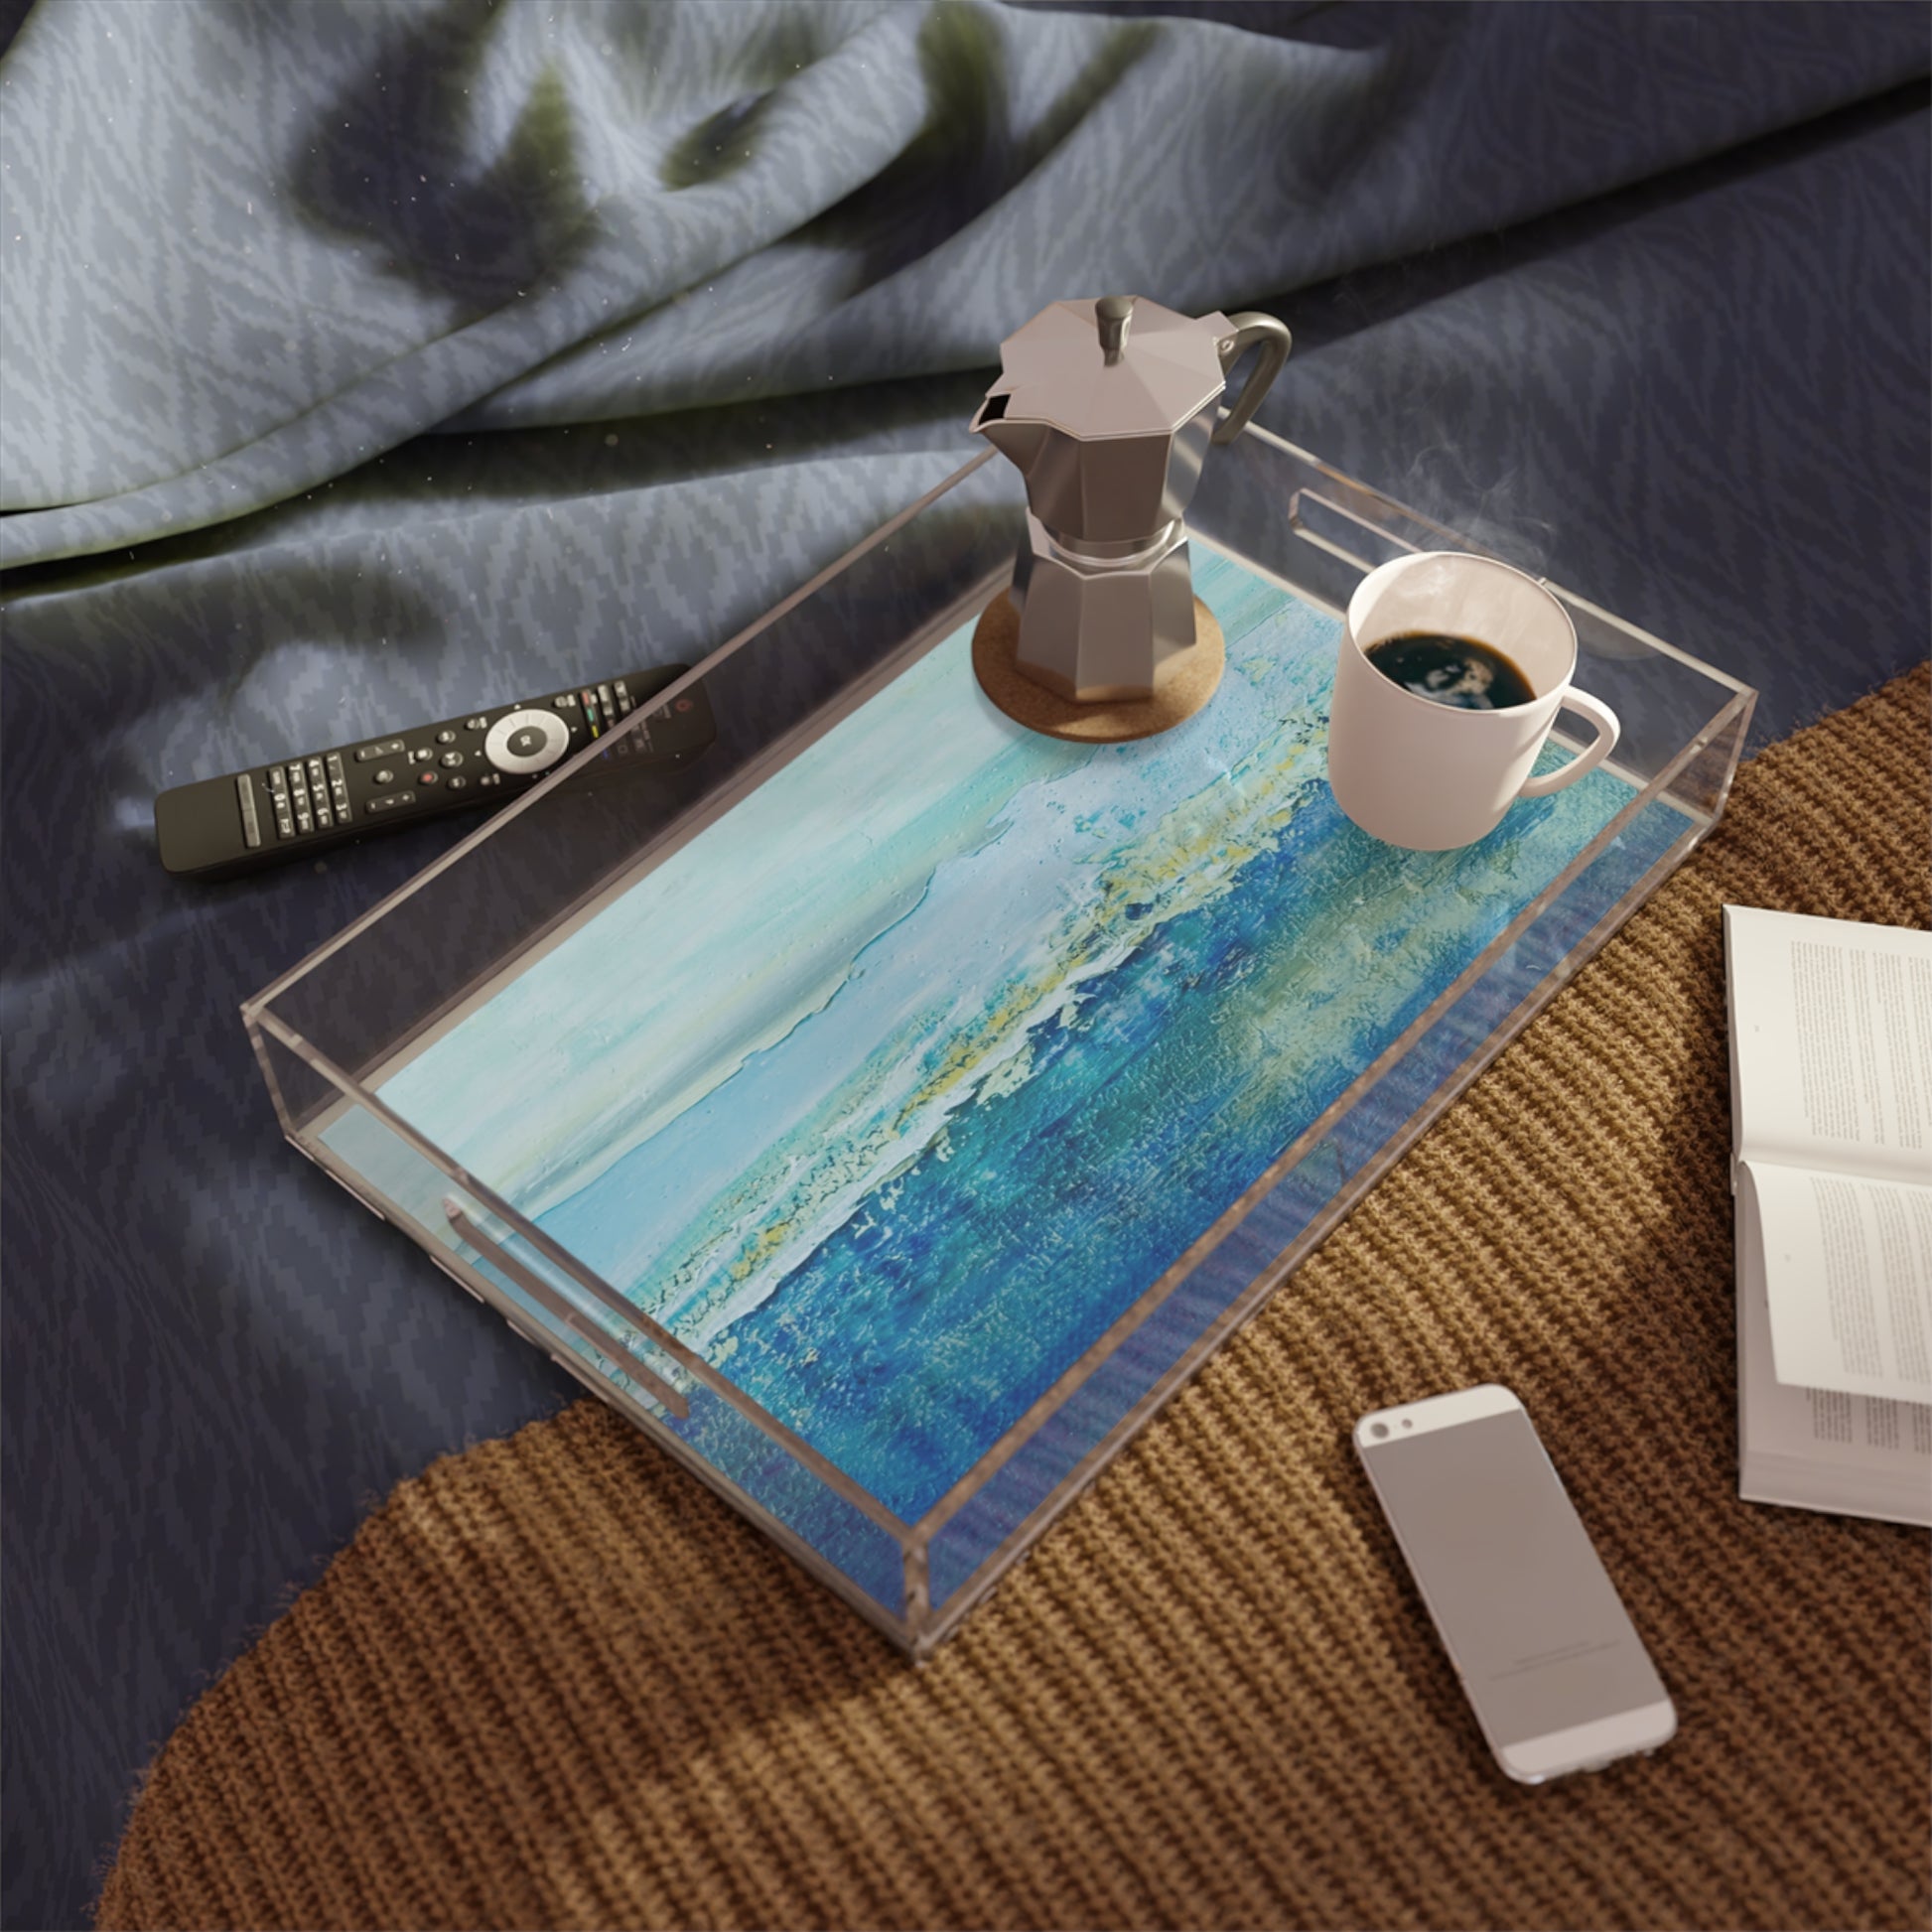 Mock up of the tray on a bed with coffee cup surrounded by electronic devices